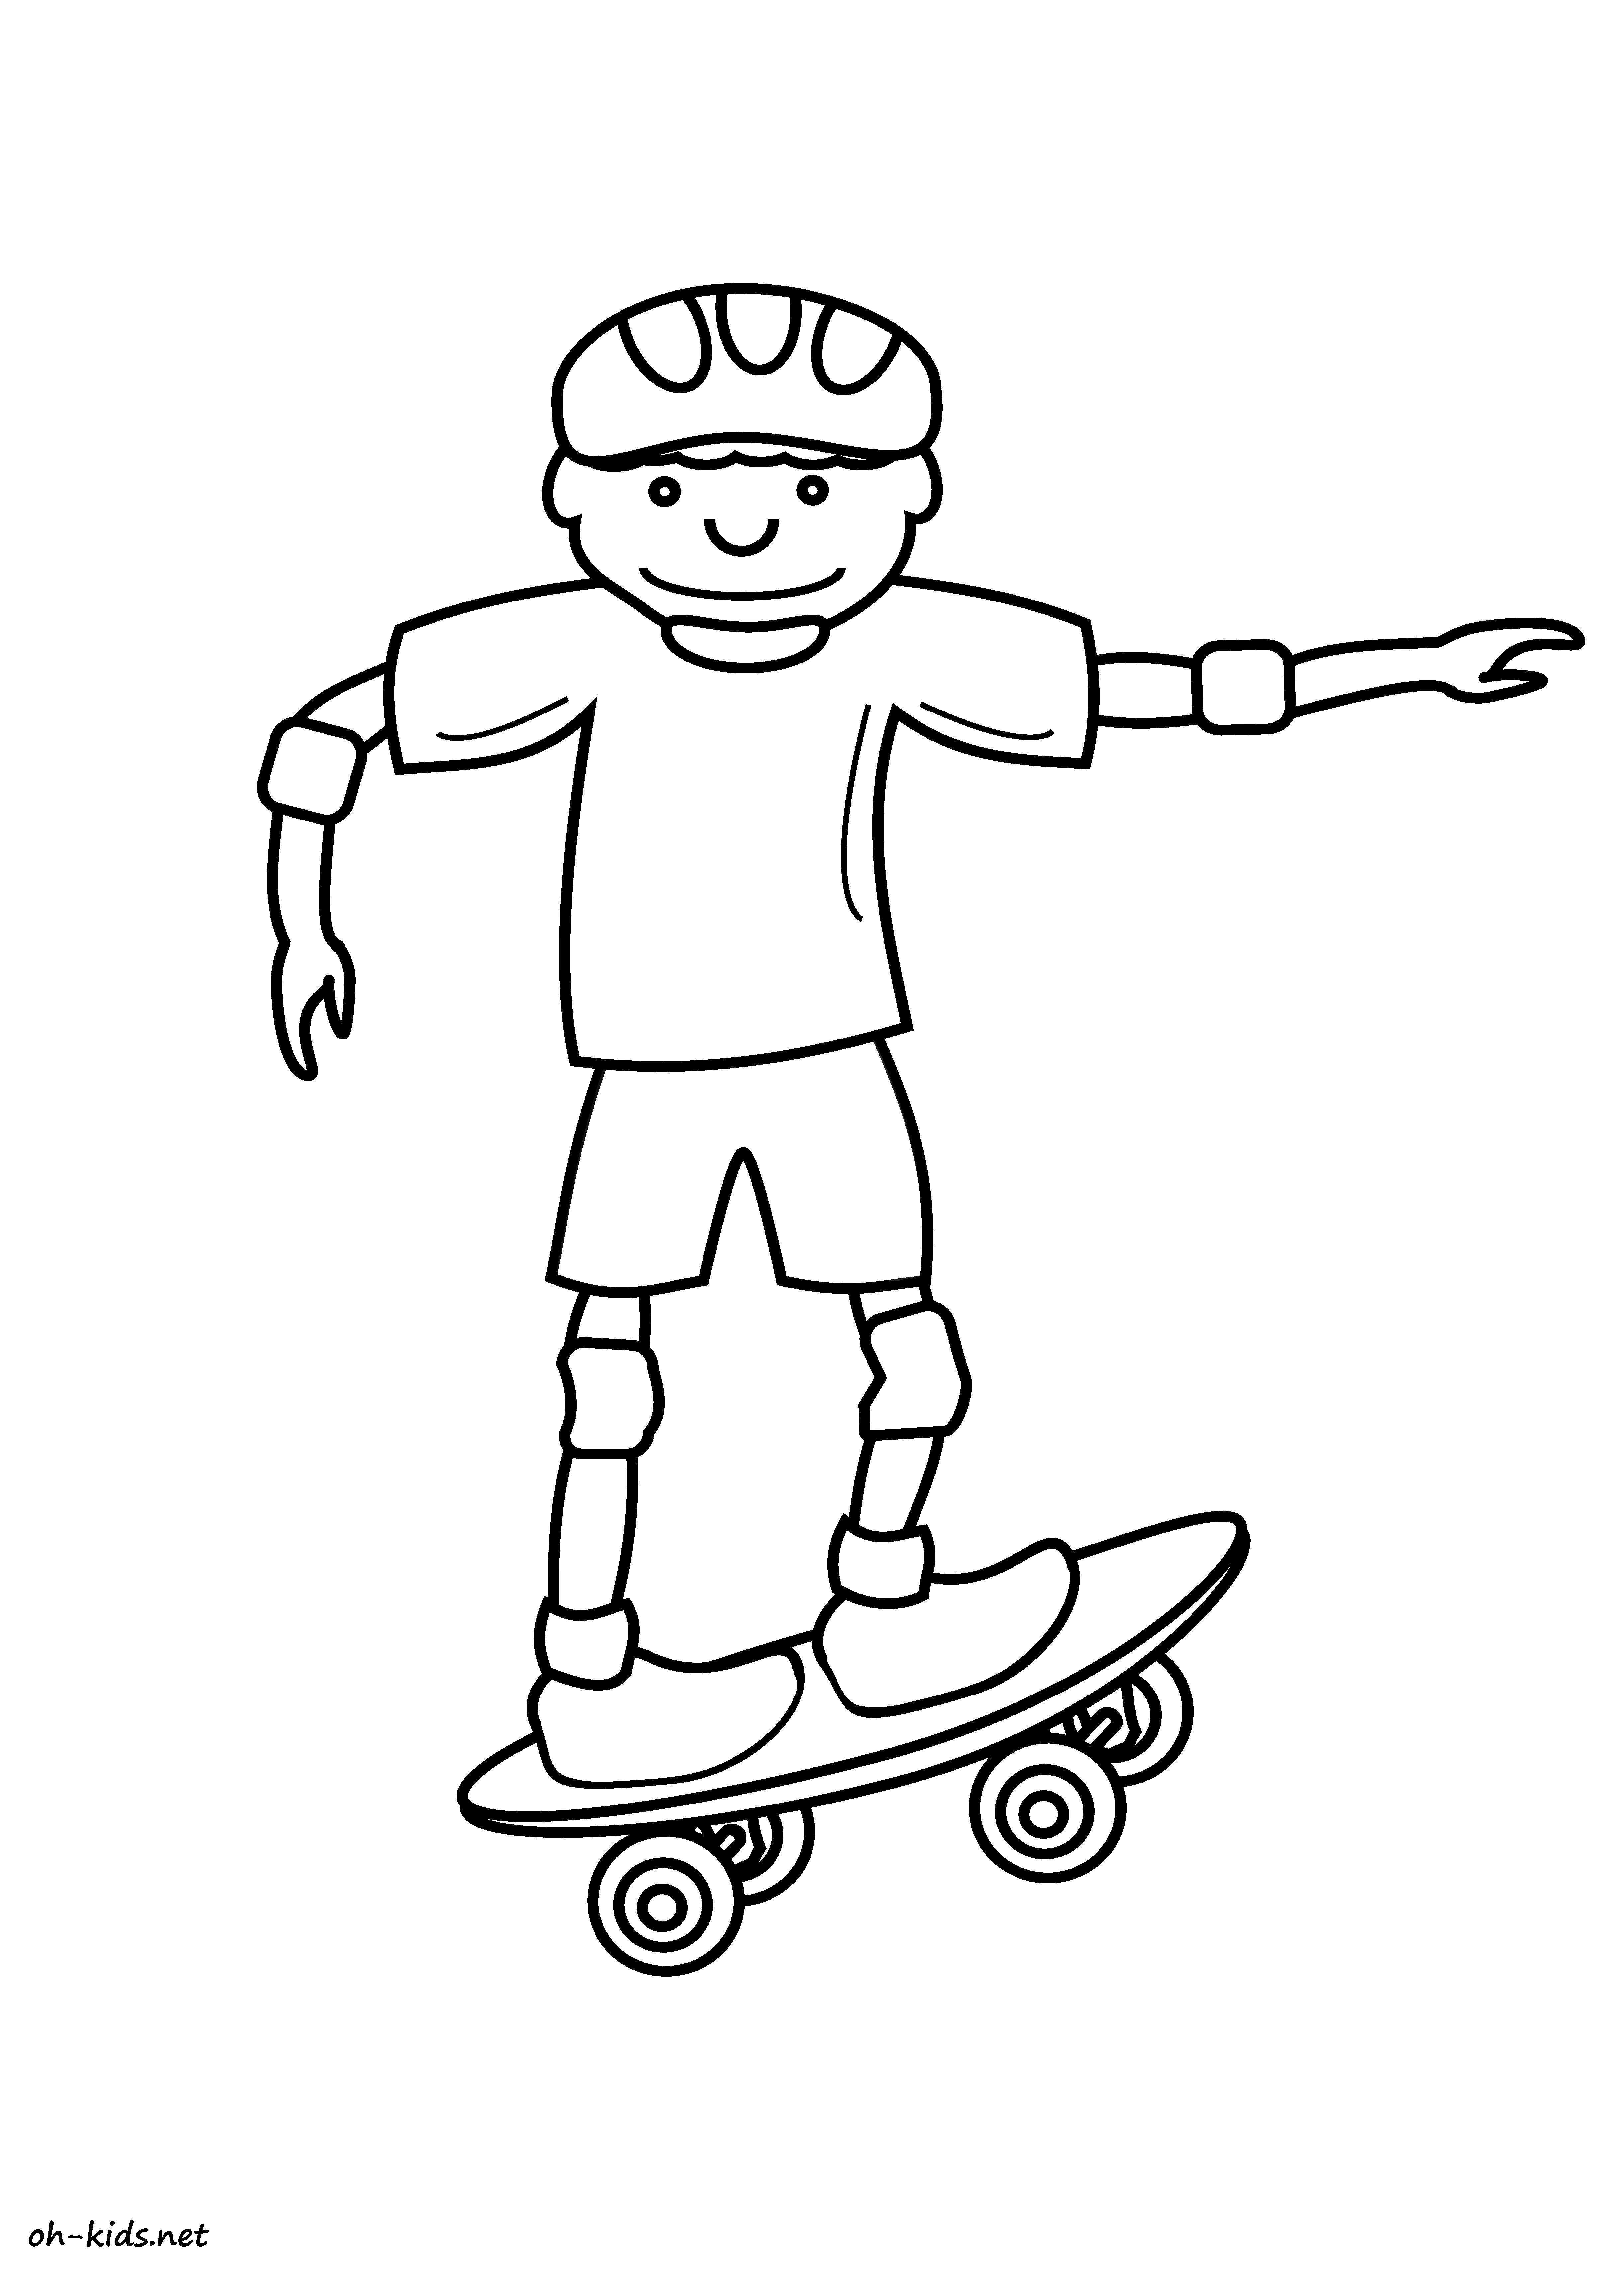 Skateboarder Coloring Page